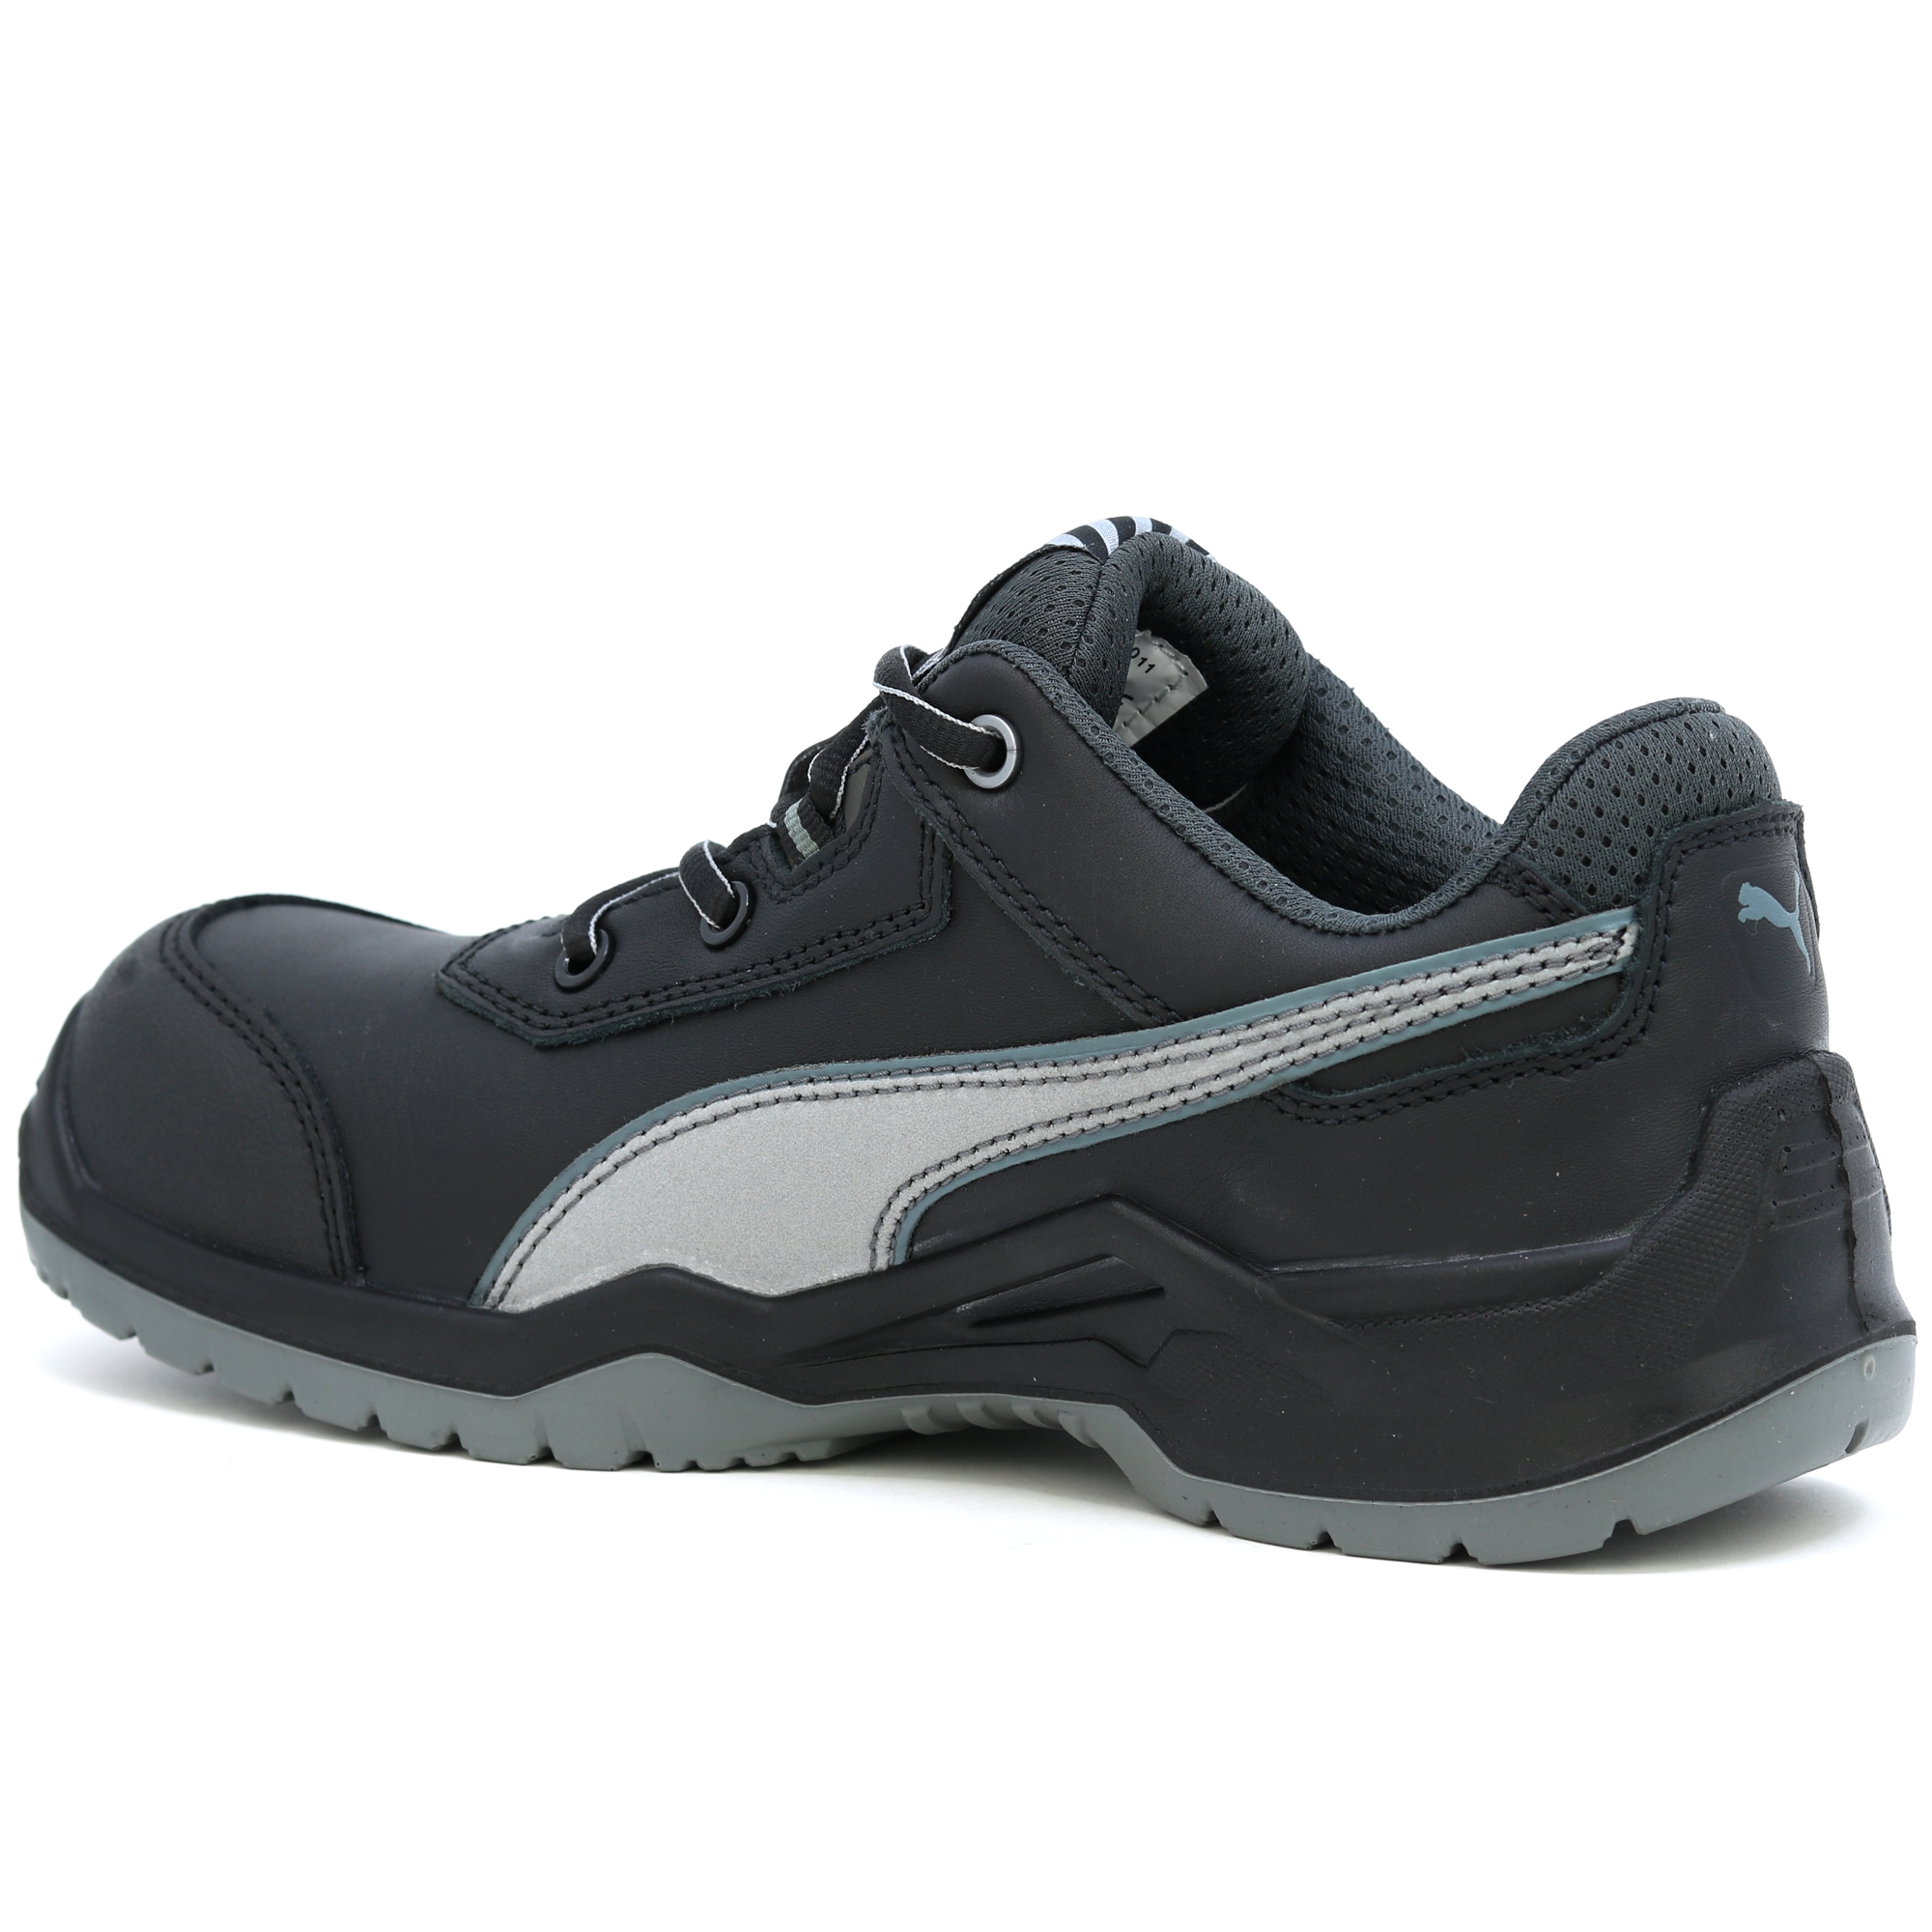 PUMA Argon RX Low S3 ESD Safety shoes